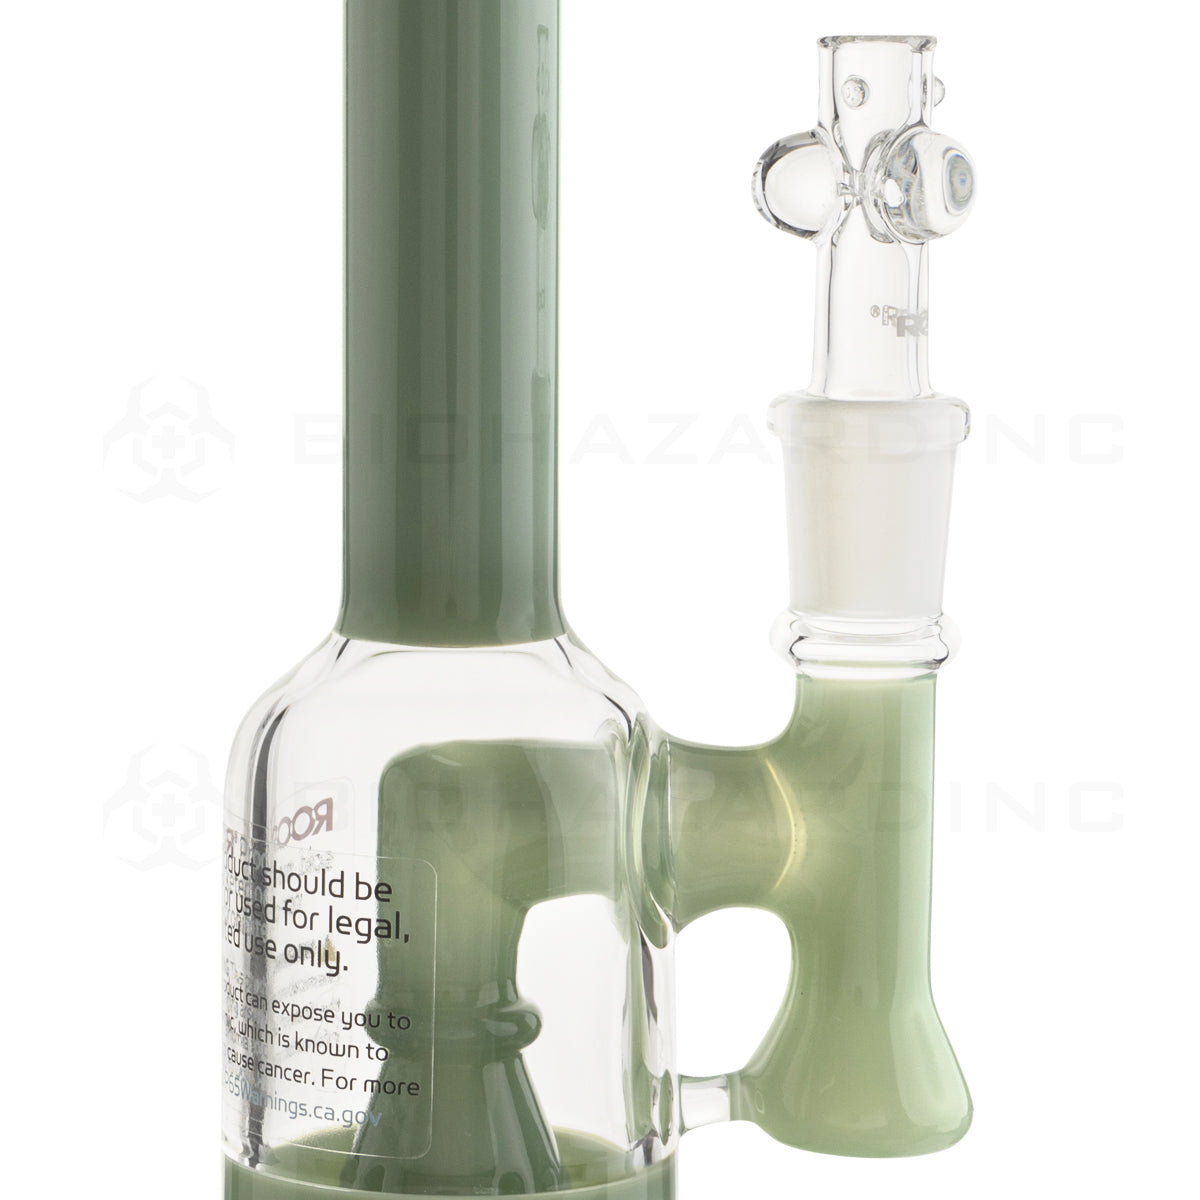 RooR® | Slugger Water Pipe w/ Fixed Downstem | 14" - 14mm - Full Mint Glass Bong Roor   